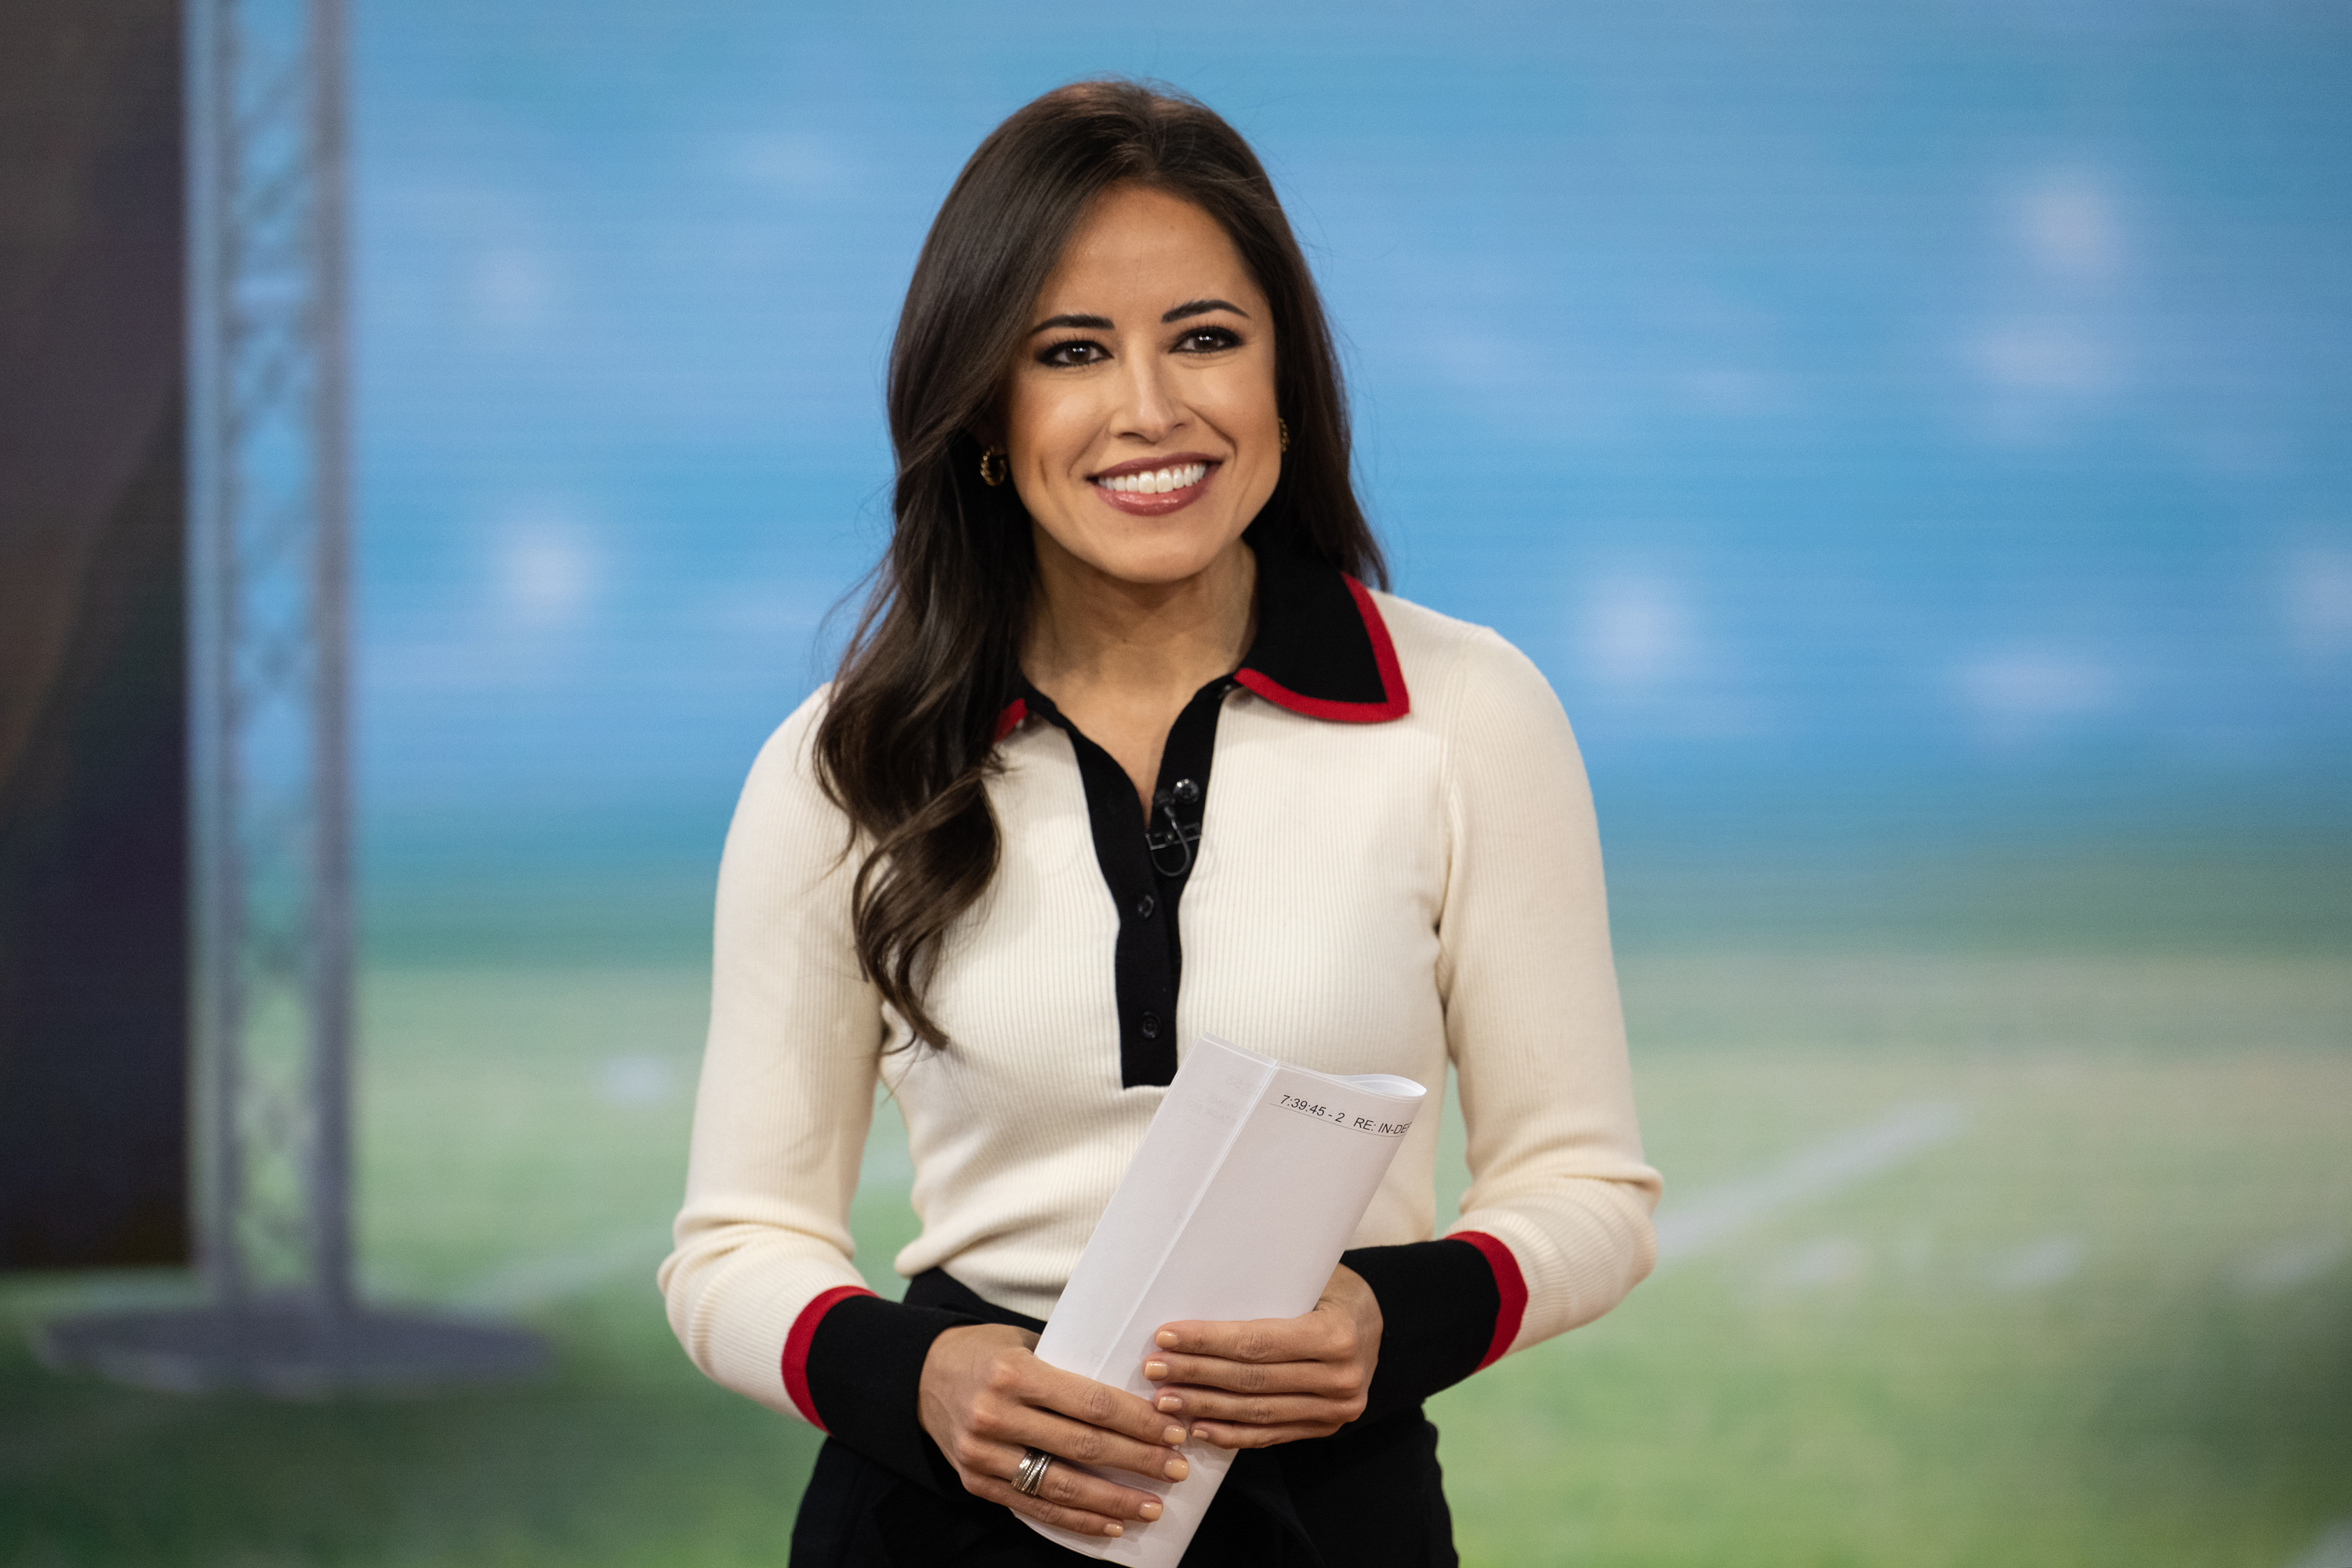 Kaylee Hartung on "Today" Season 72 on January 23, 2023. | Source: Getty Images